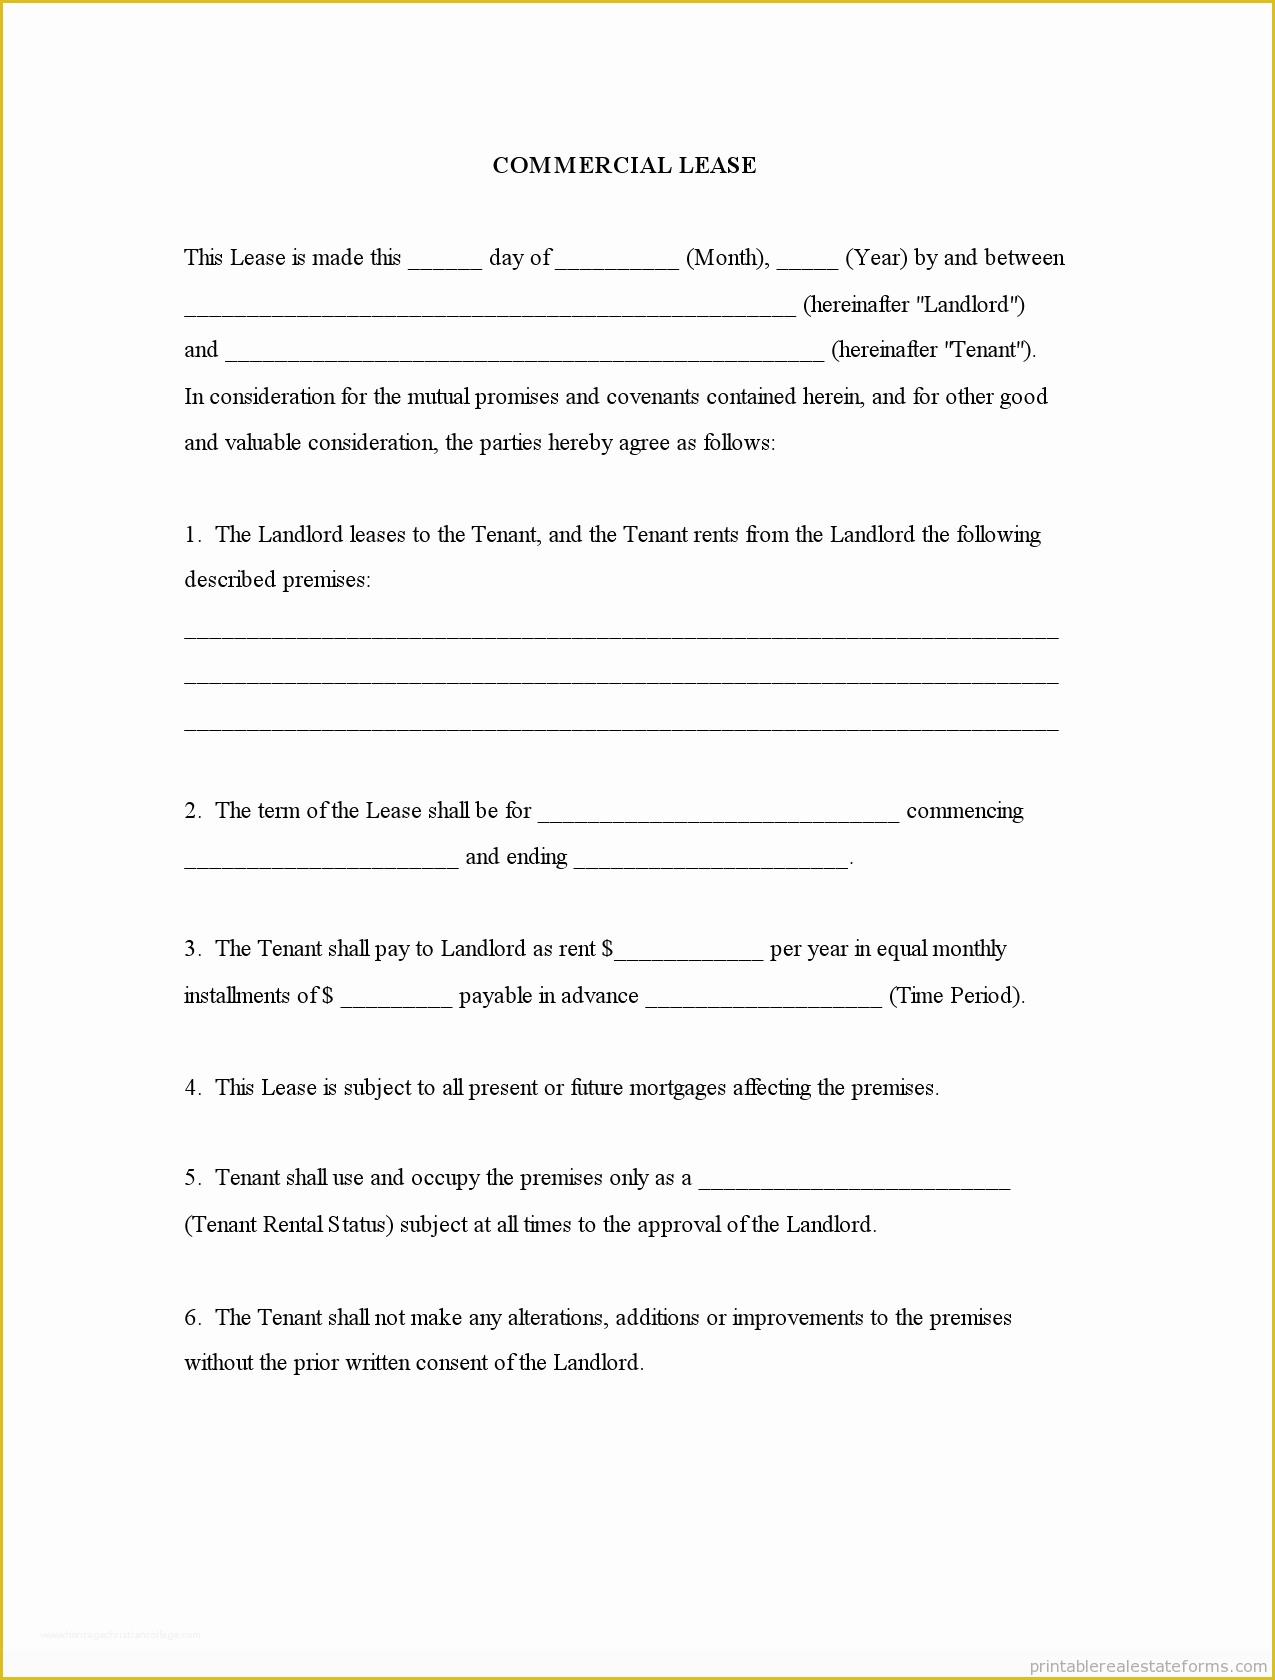 Free Simple Commercial Lease Agreement Template Of Free Mercial Lease Agreement forms to Print Template